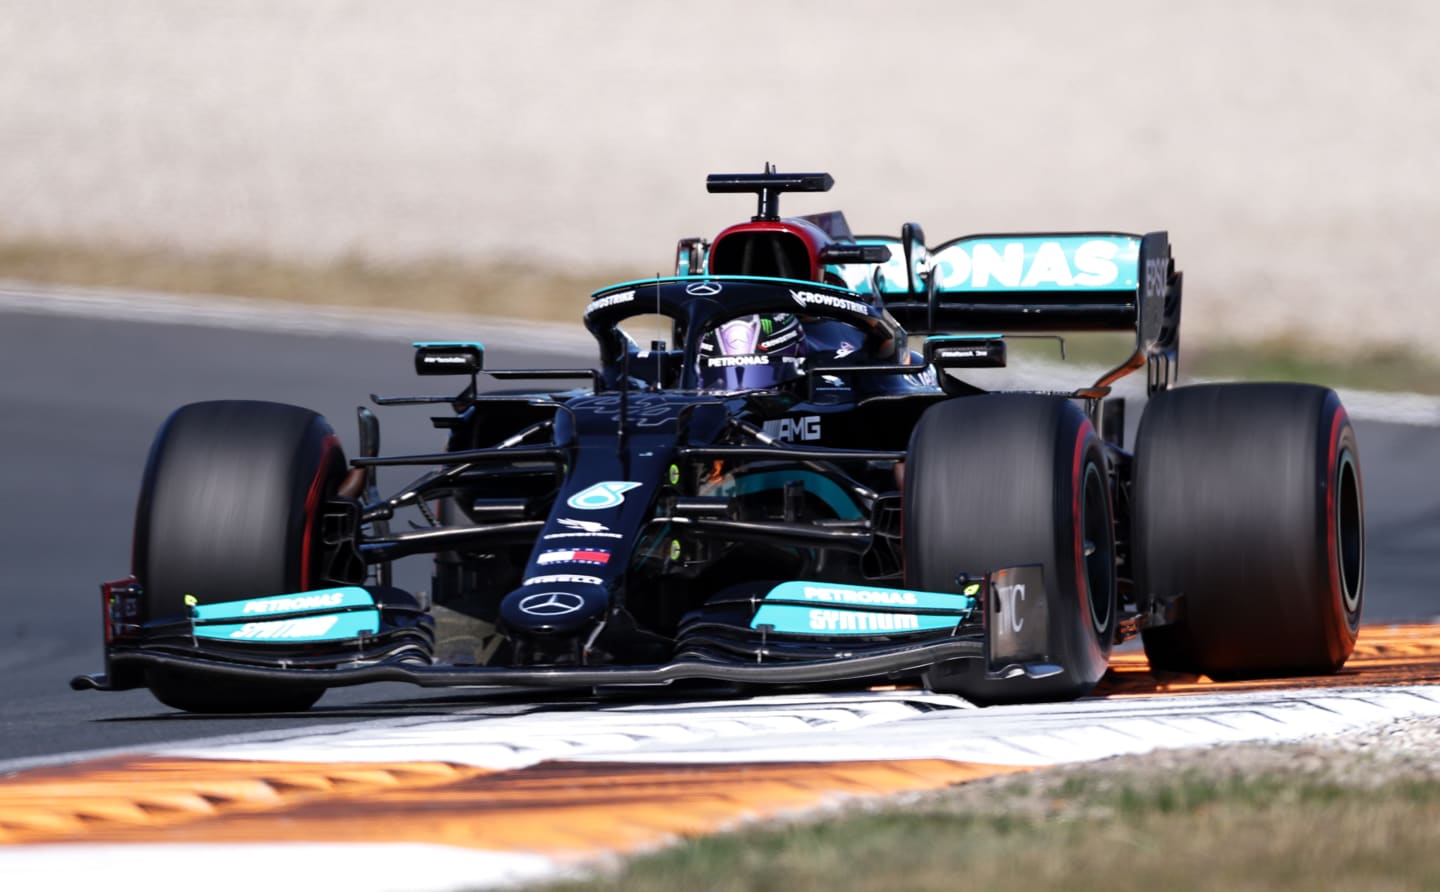 ZANDVOORT, NETHERLANDS - SEPTEMBER 05: Lewis Hamilton of Great Britain driving the (44) Mercedes AMG Petronas F1 Team Mercedes W12 during the F1 Grand Prix of The Netherlands at Circuit Zandvoort on September 05, 2021 in Zandvoort, Netherlands. (Photo by Lars Baron/Getty Images)